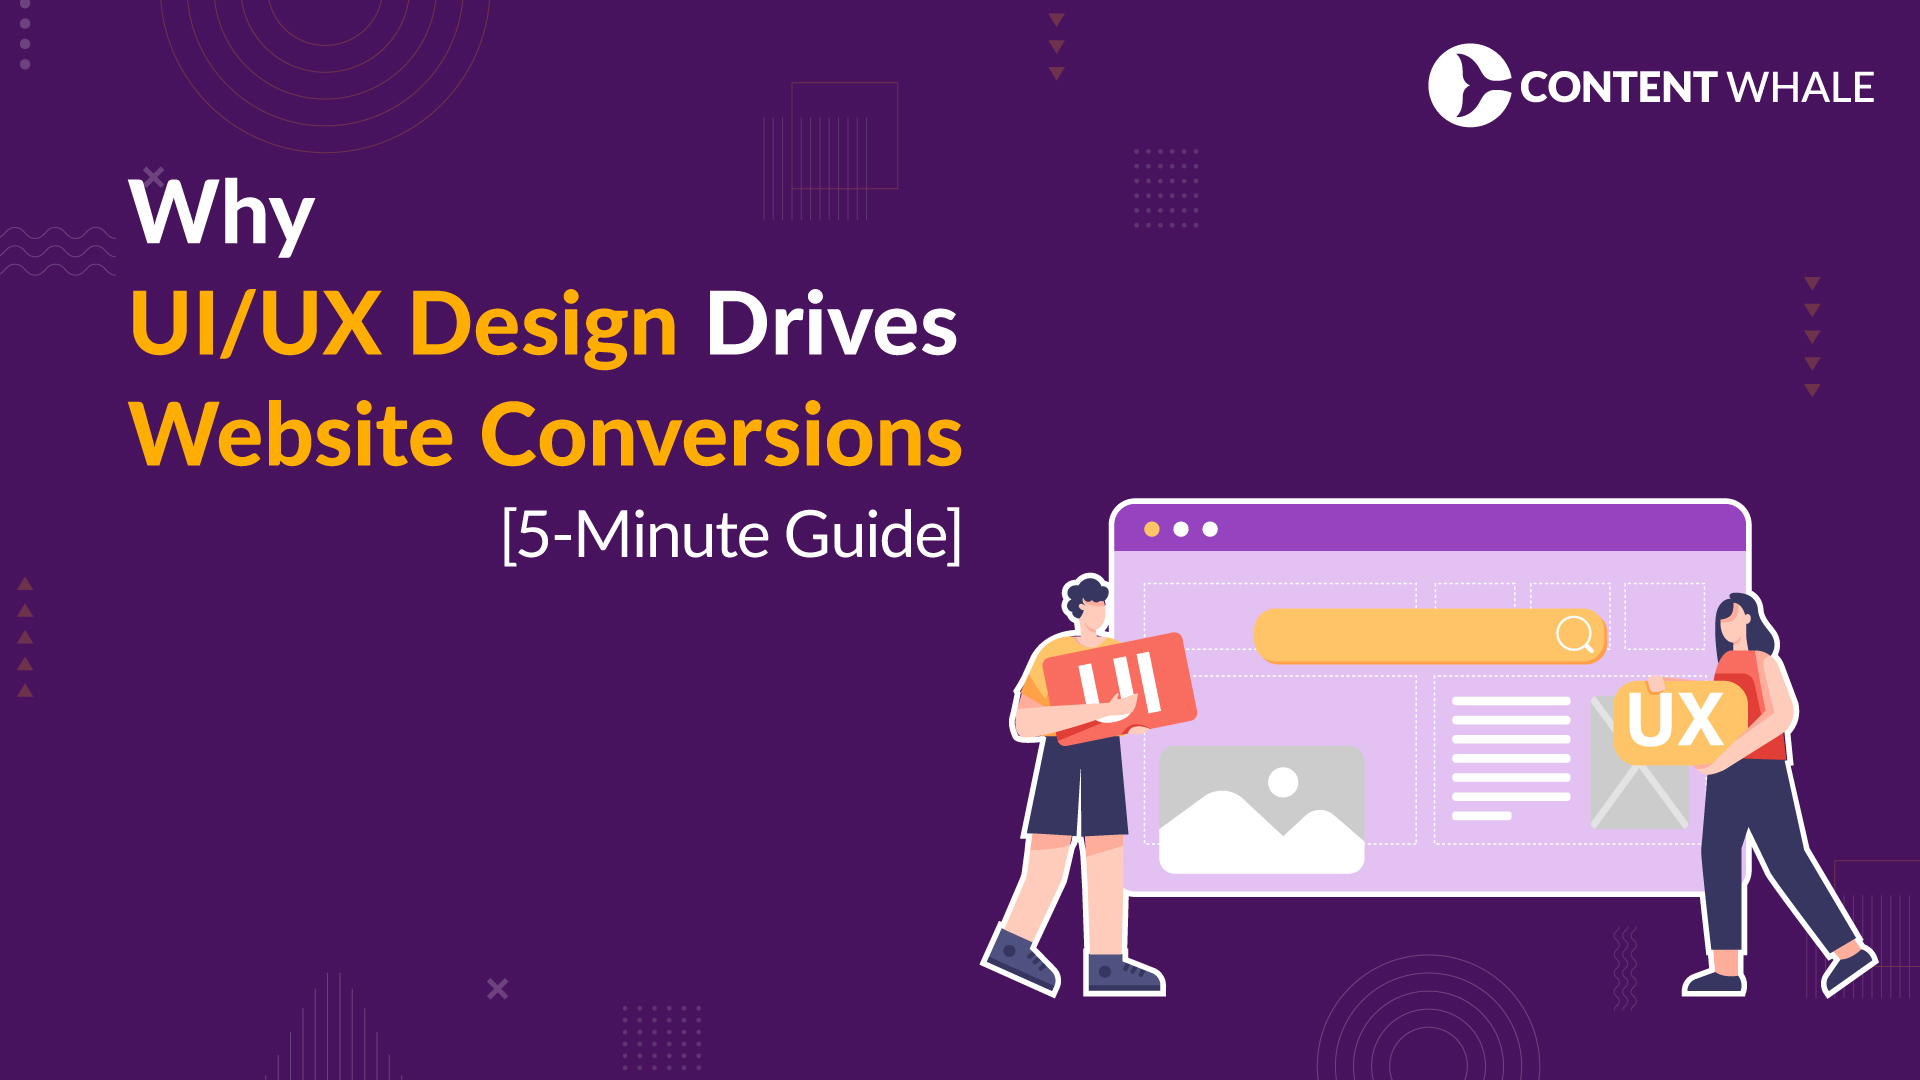 Why UI/UX Design Drives Website Conversions | Does UI/UX Design Drives Website Conversions | Is UI/UX Design important for Website Conversions | Is UI/UX Design important for lead generation?